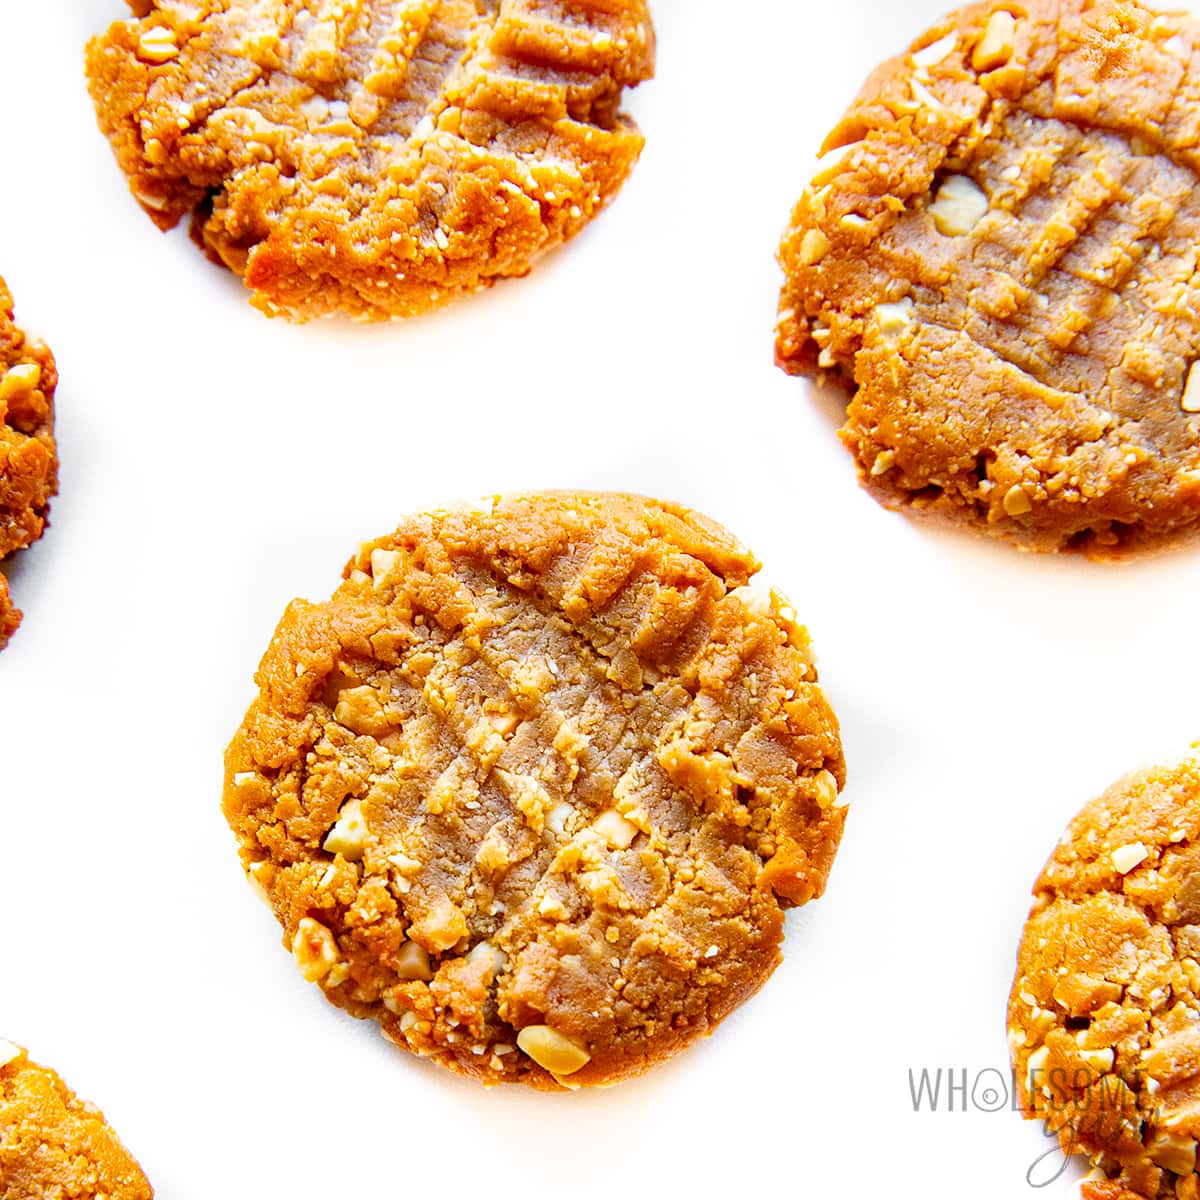 Keto peanut butter cookies on a white surface